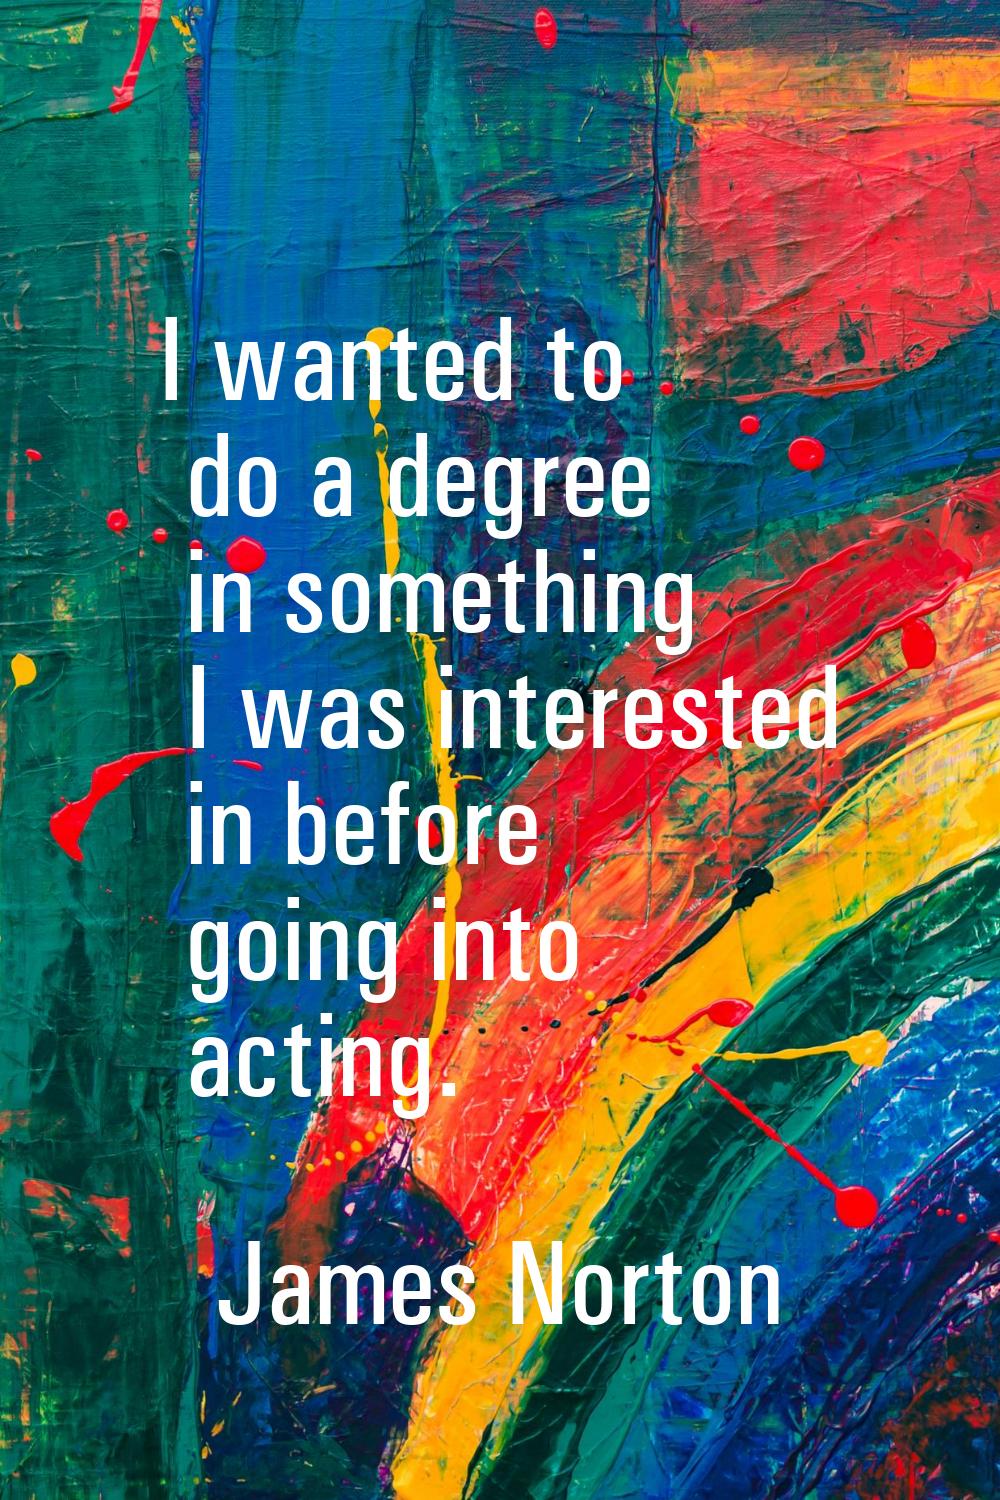 I wanted to do a degree in something I was interested in before going into acting.